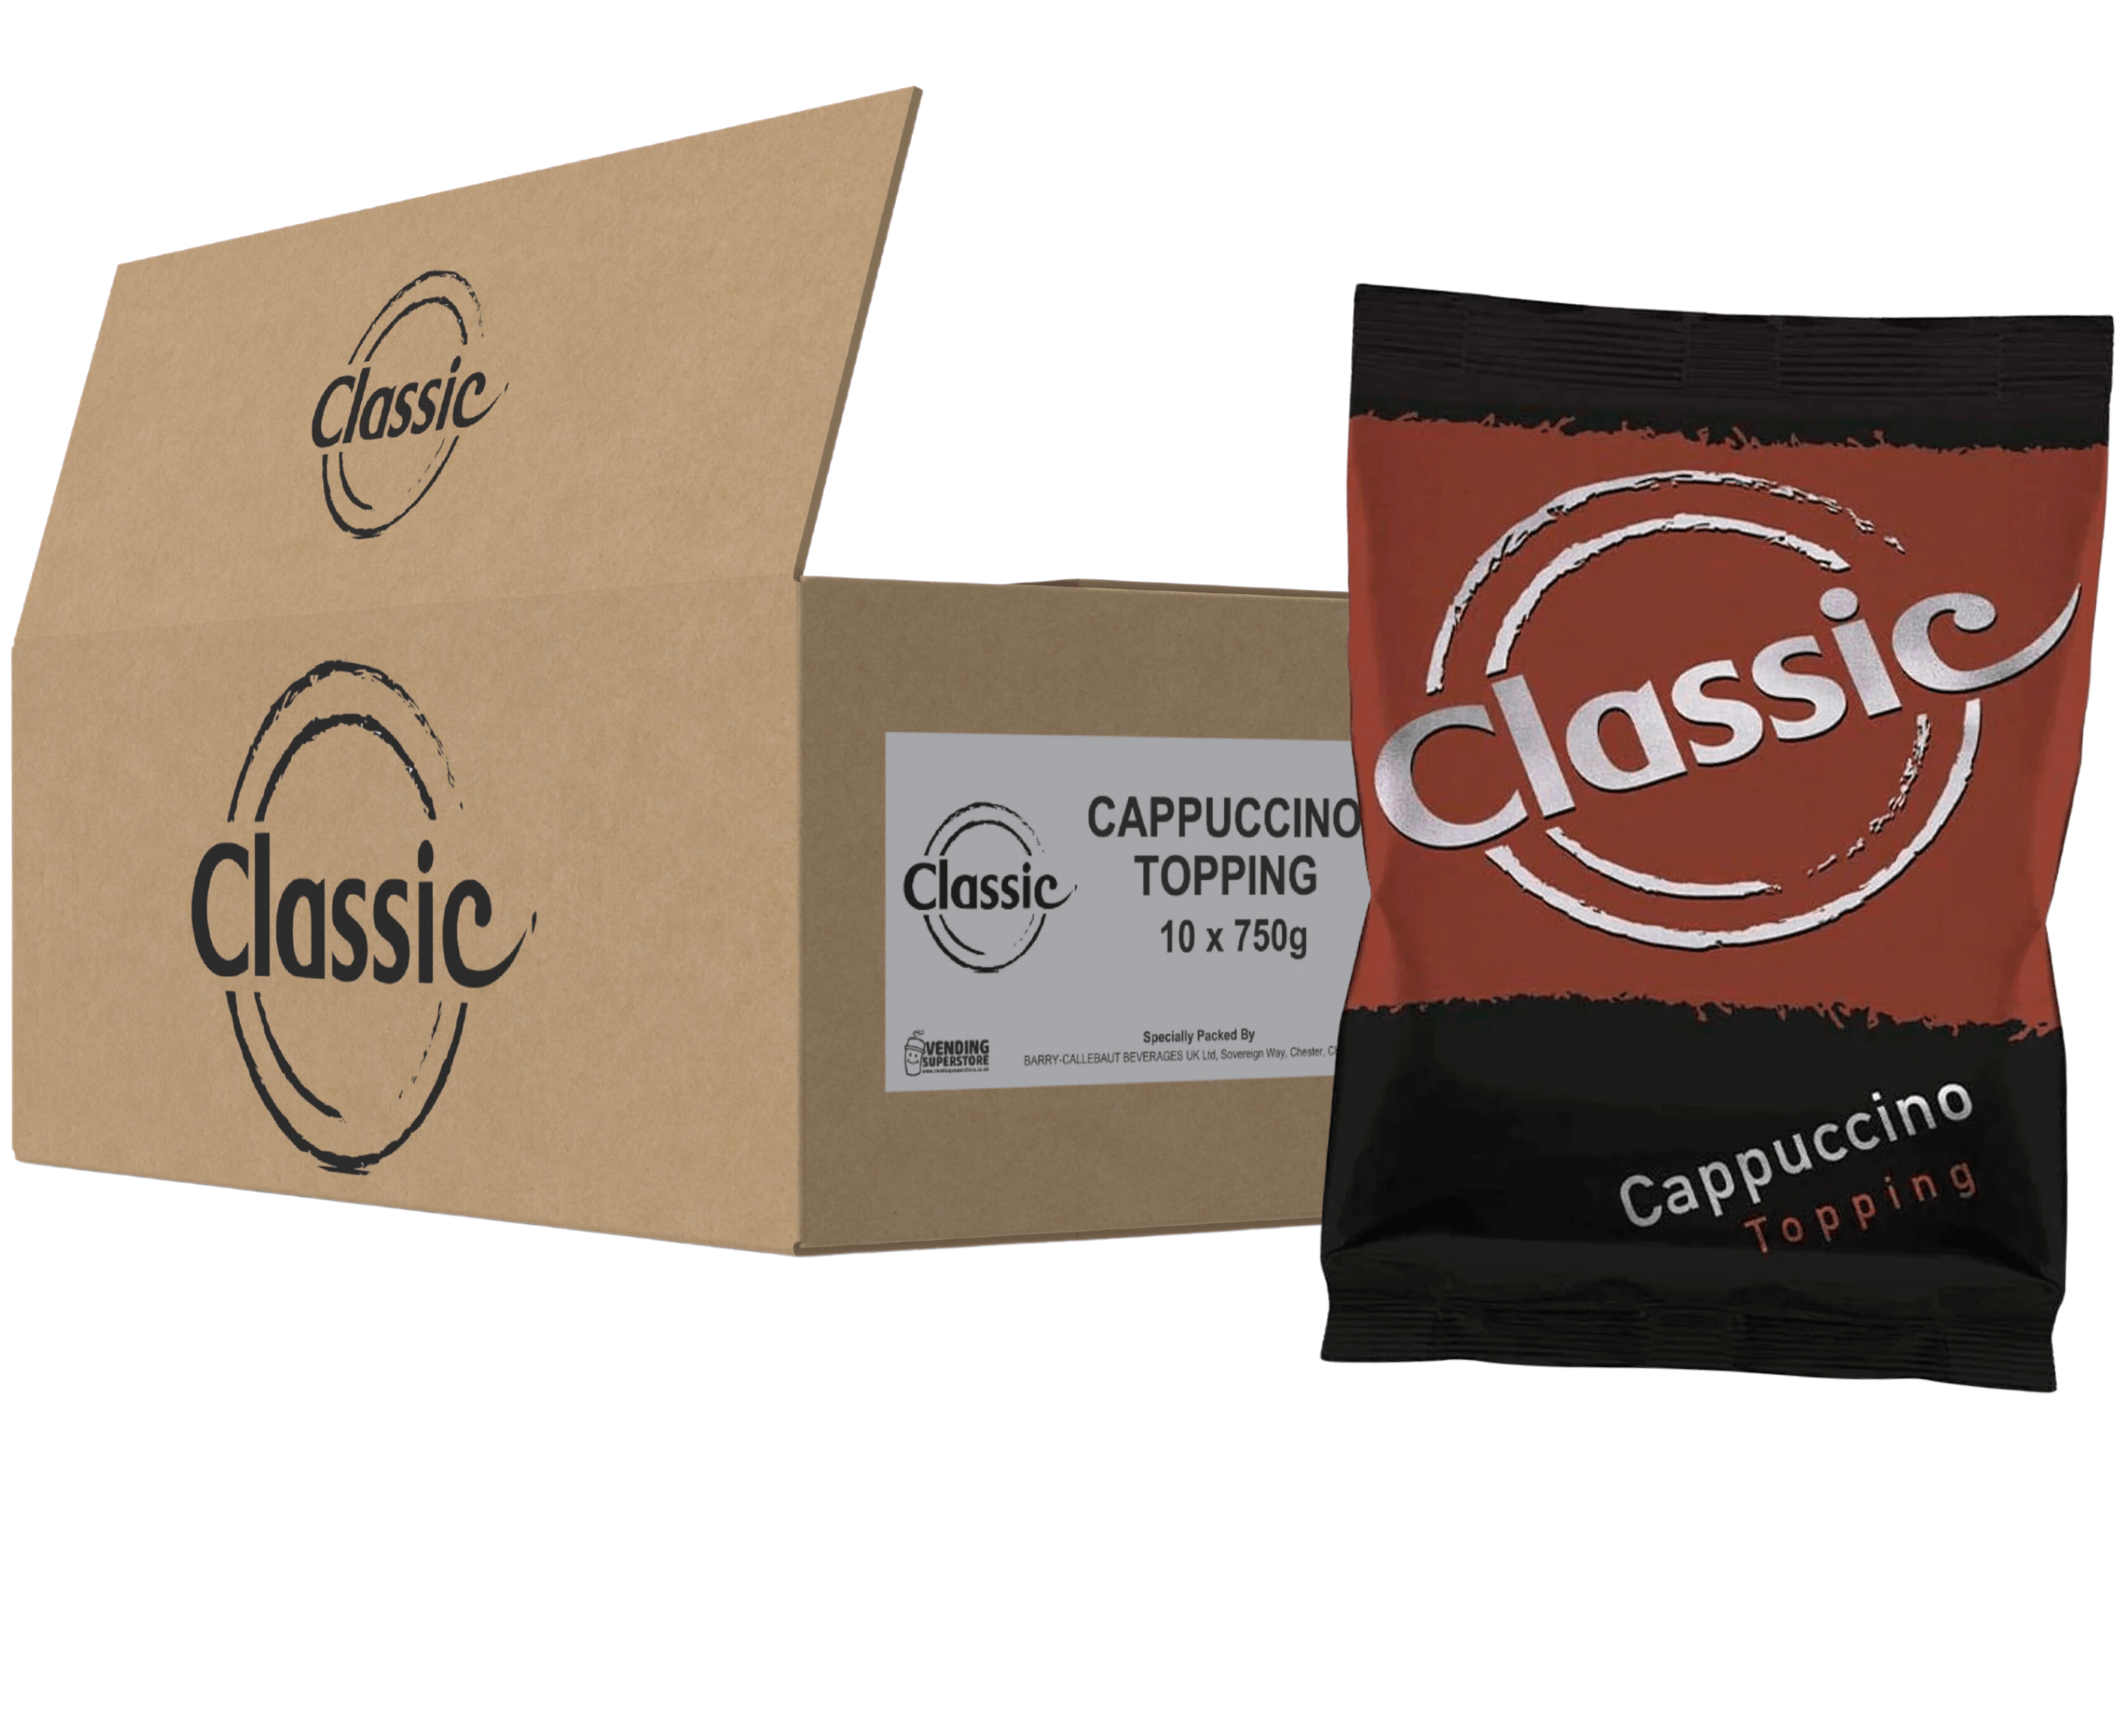 Classic Cappuccino Topping - 10 x 750g Bags (Full Case) - Vending Superstore